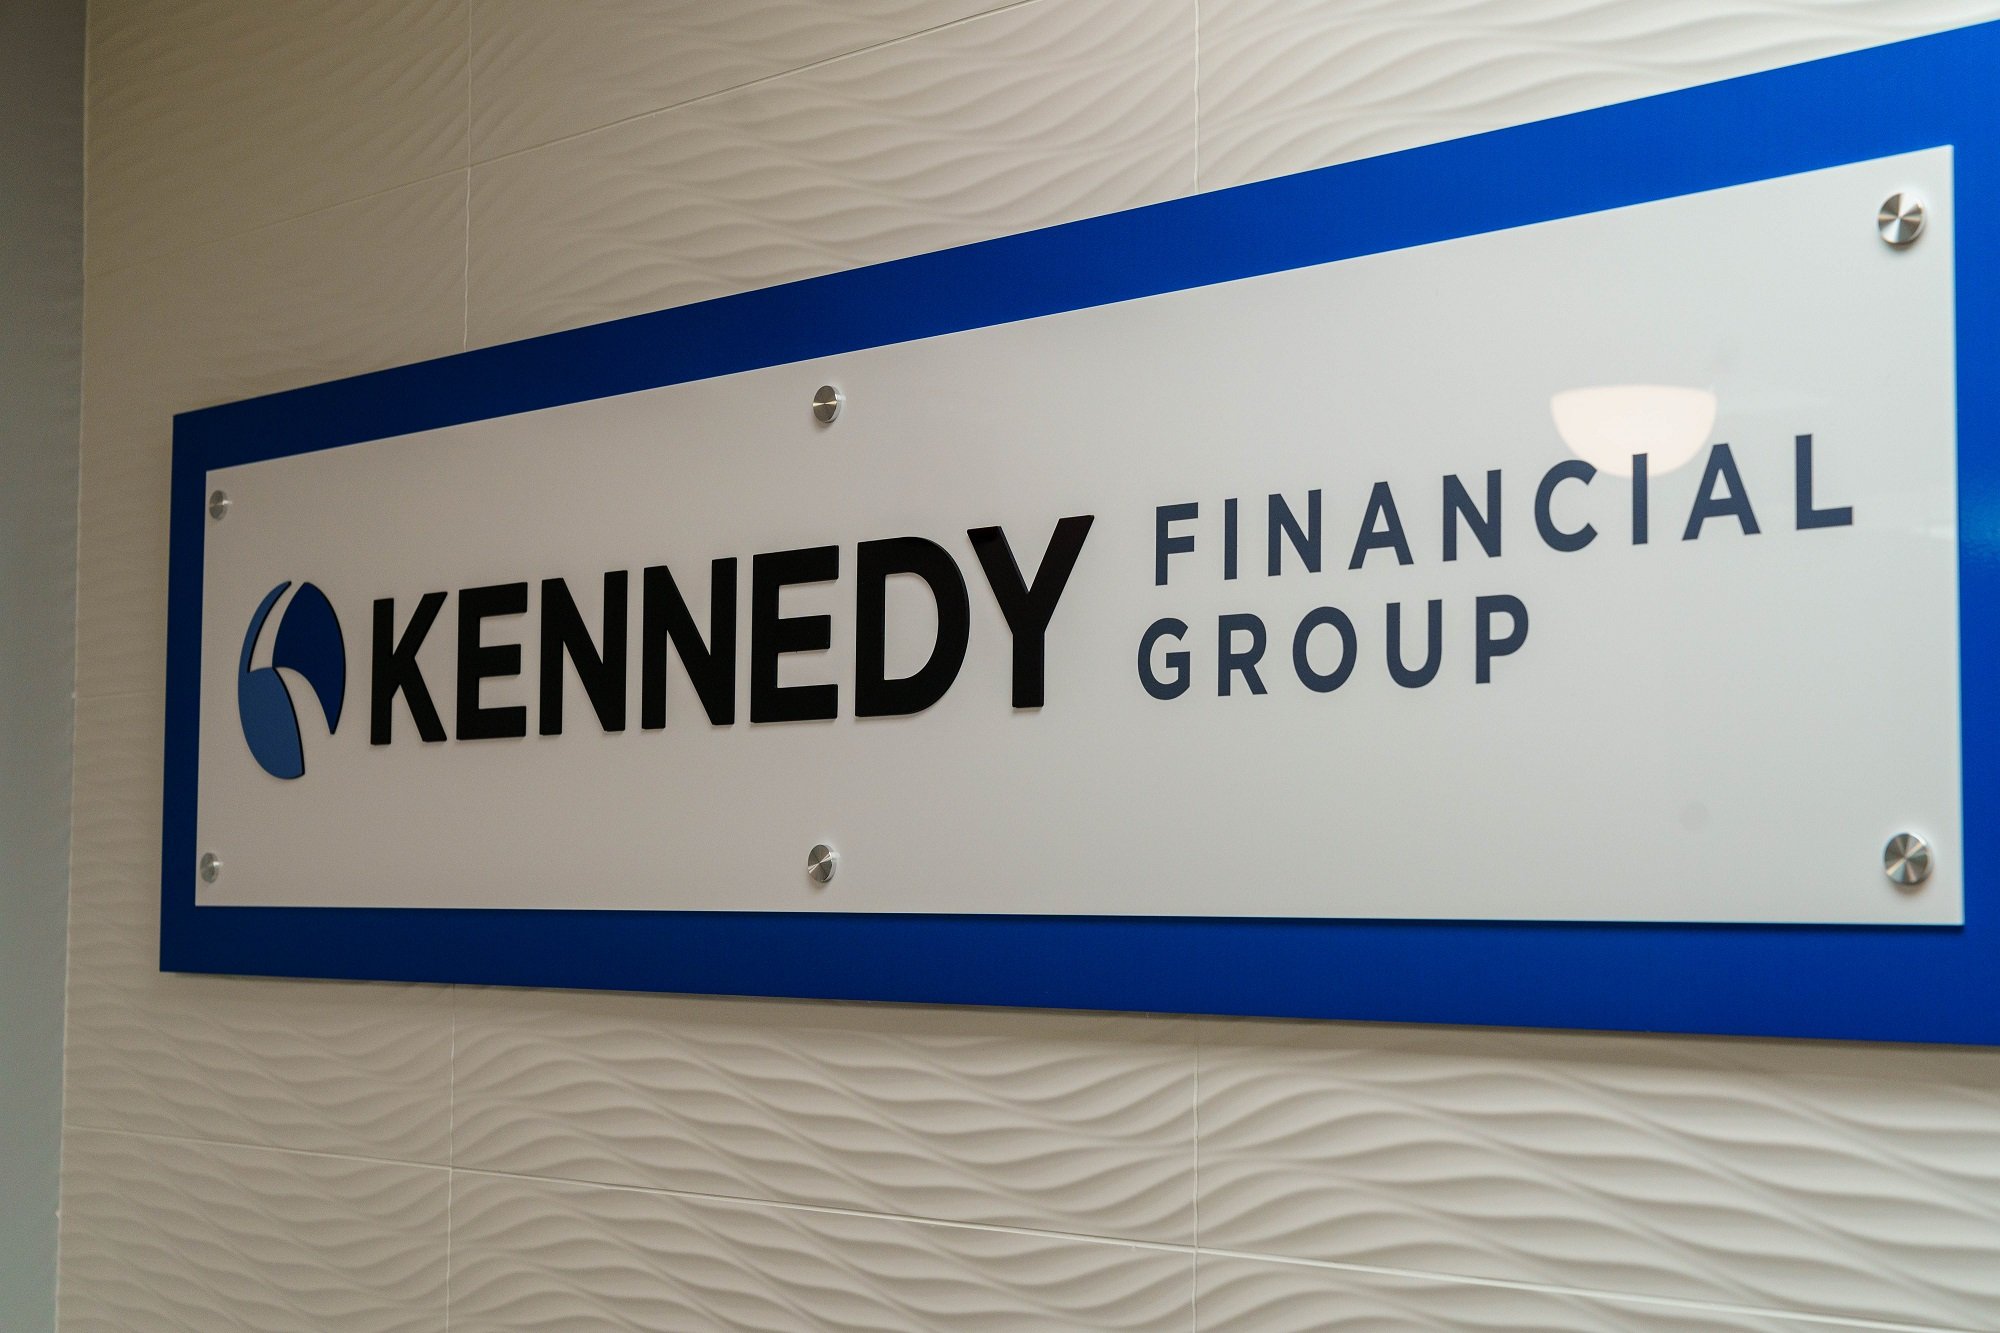 Kennedy Financial Group Interior Dimensional Sign